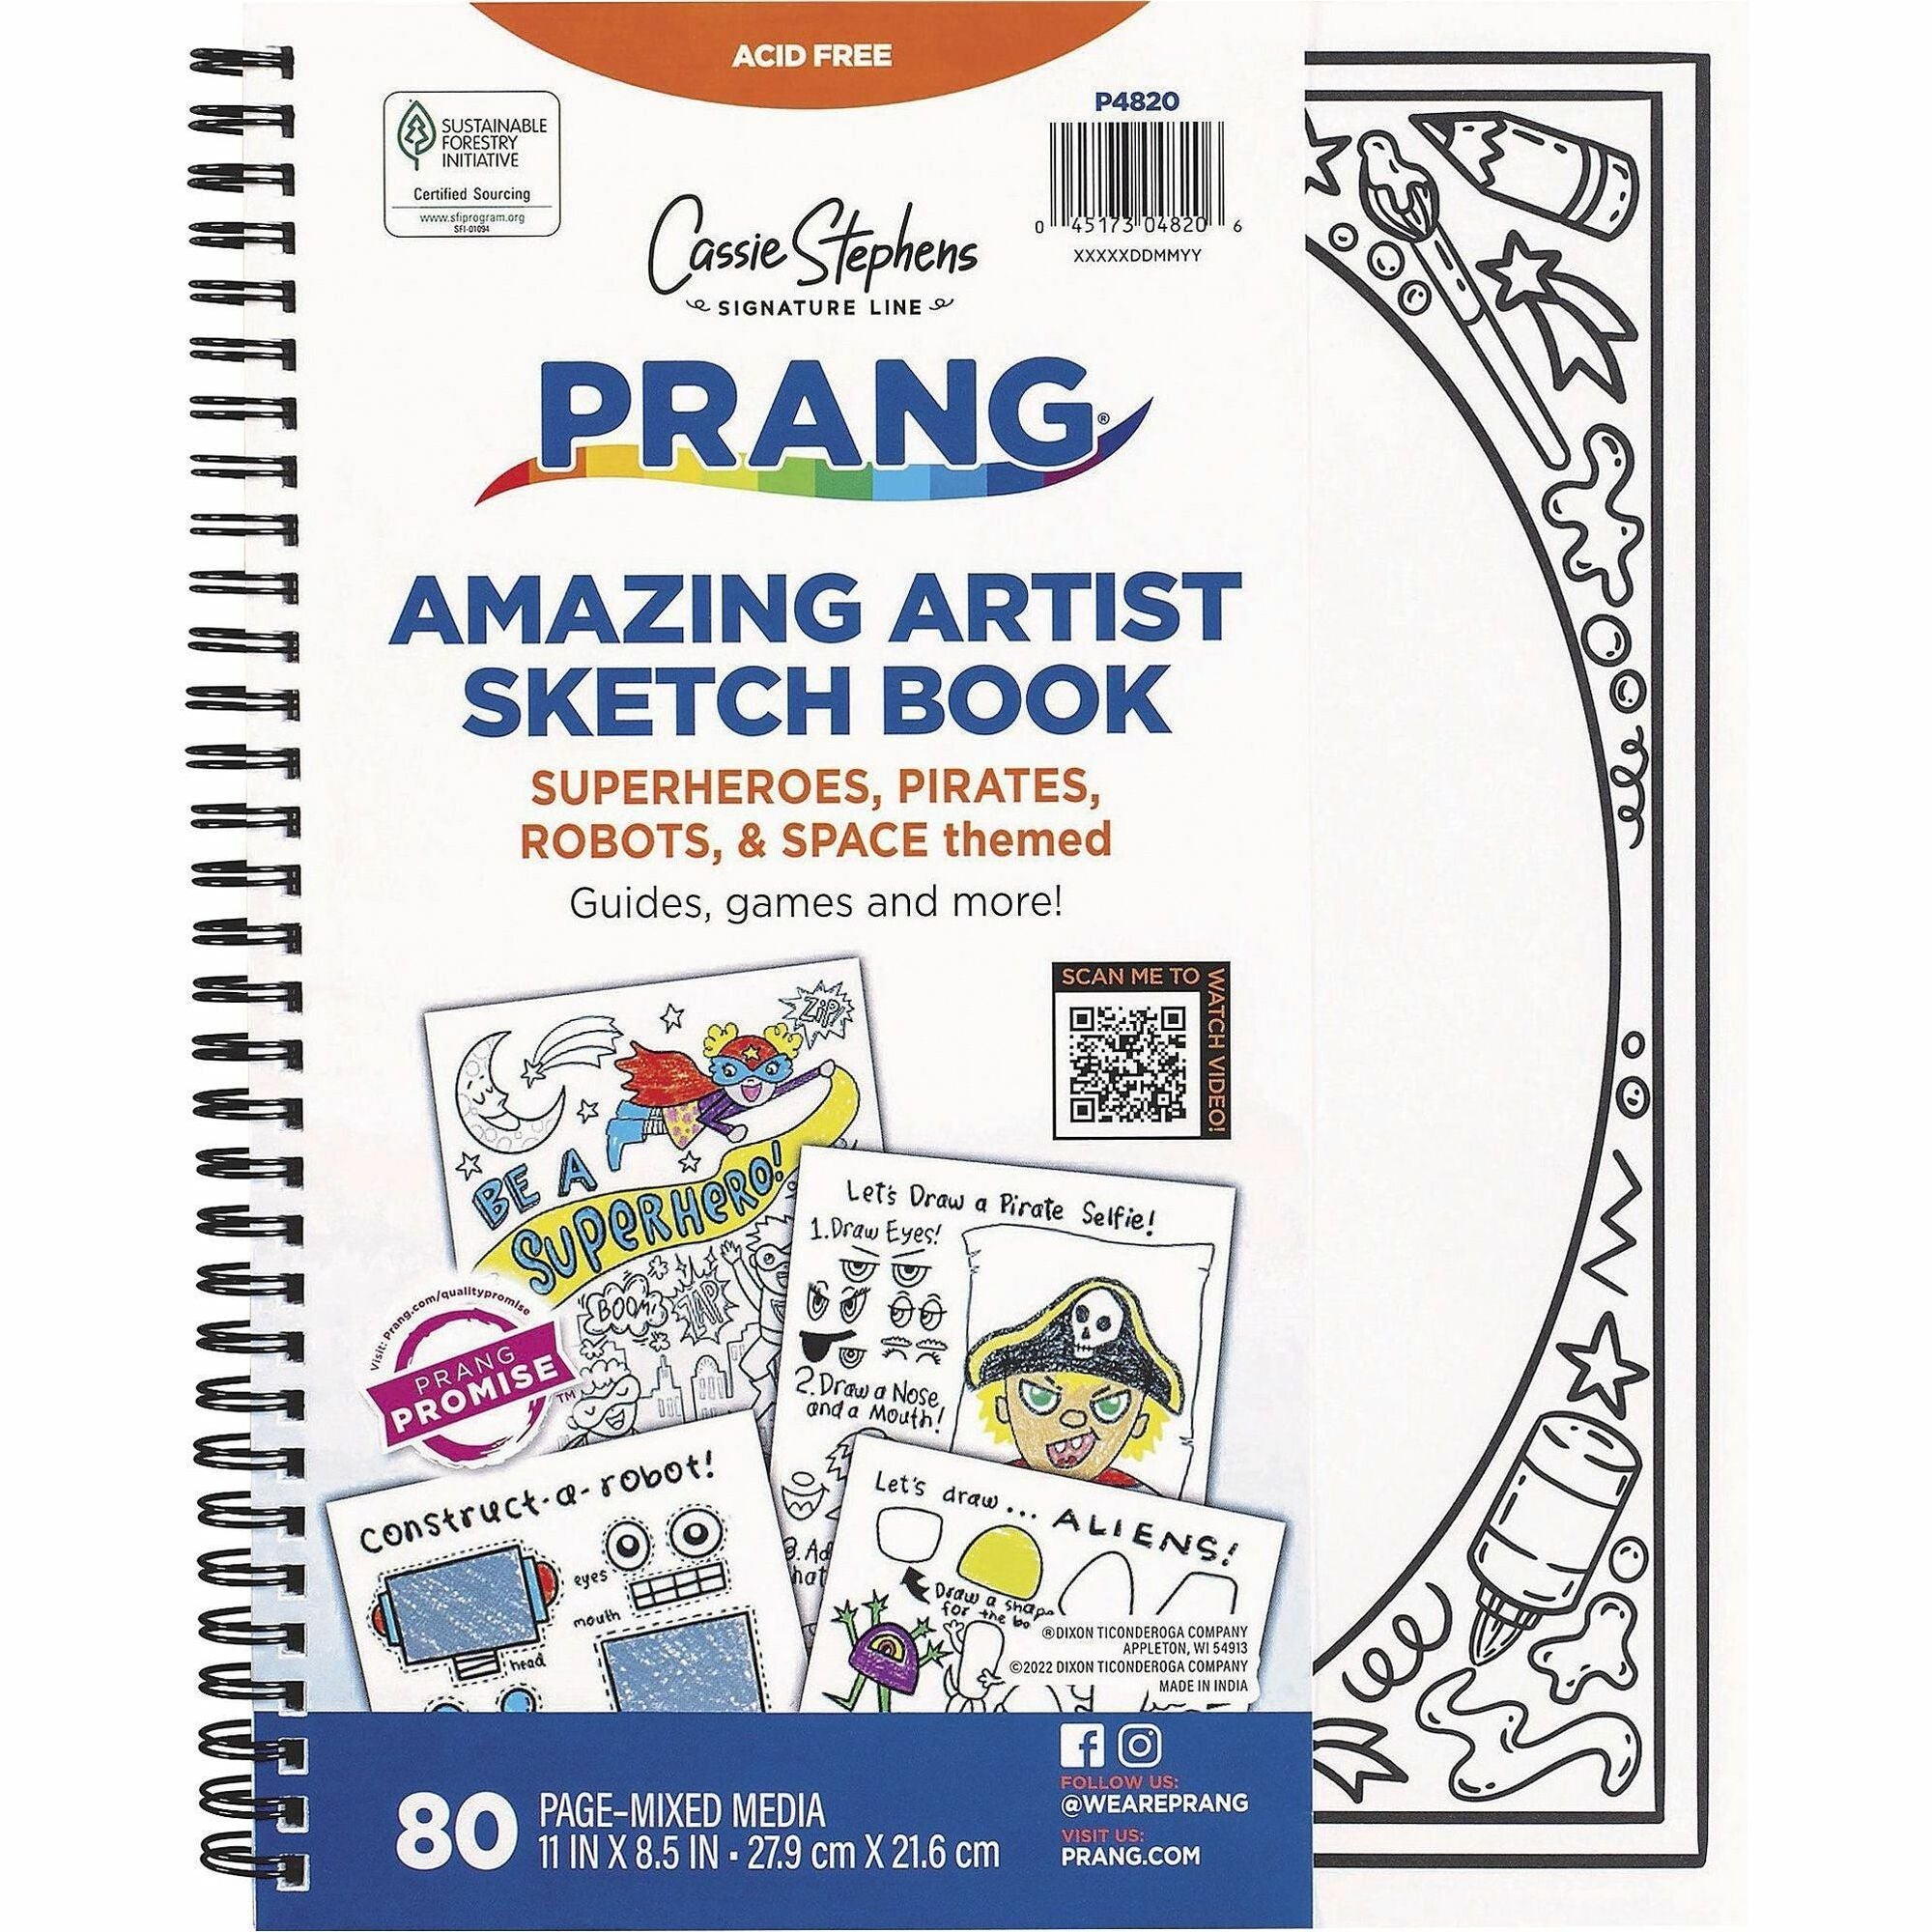 pacon-amazing-artist-sketch-book-80-pages-black-white-cover-perforated-acid-free_pacp4820 - 1